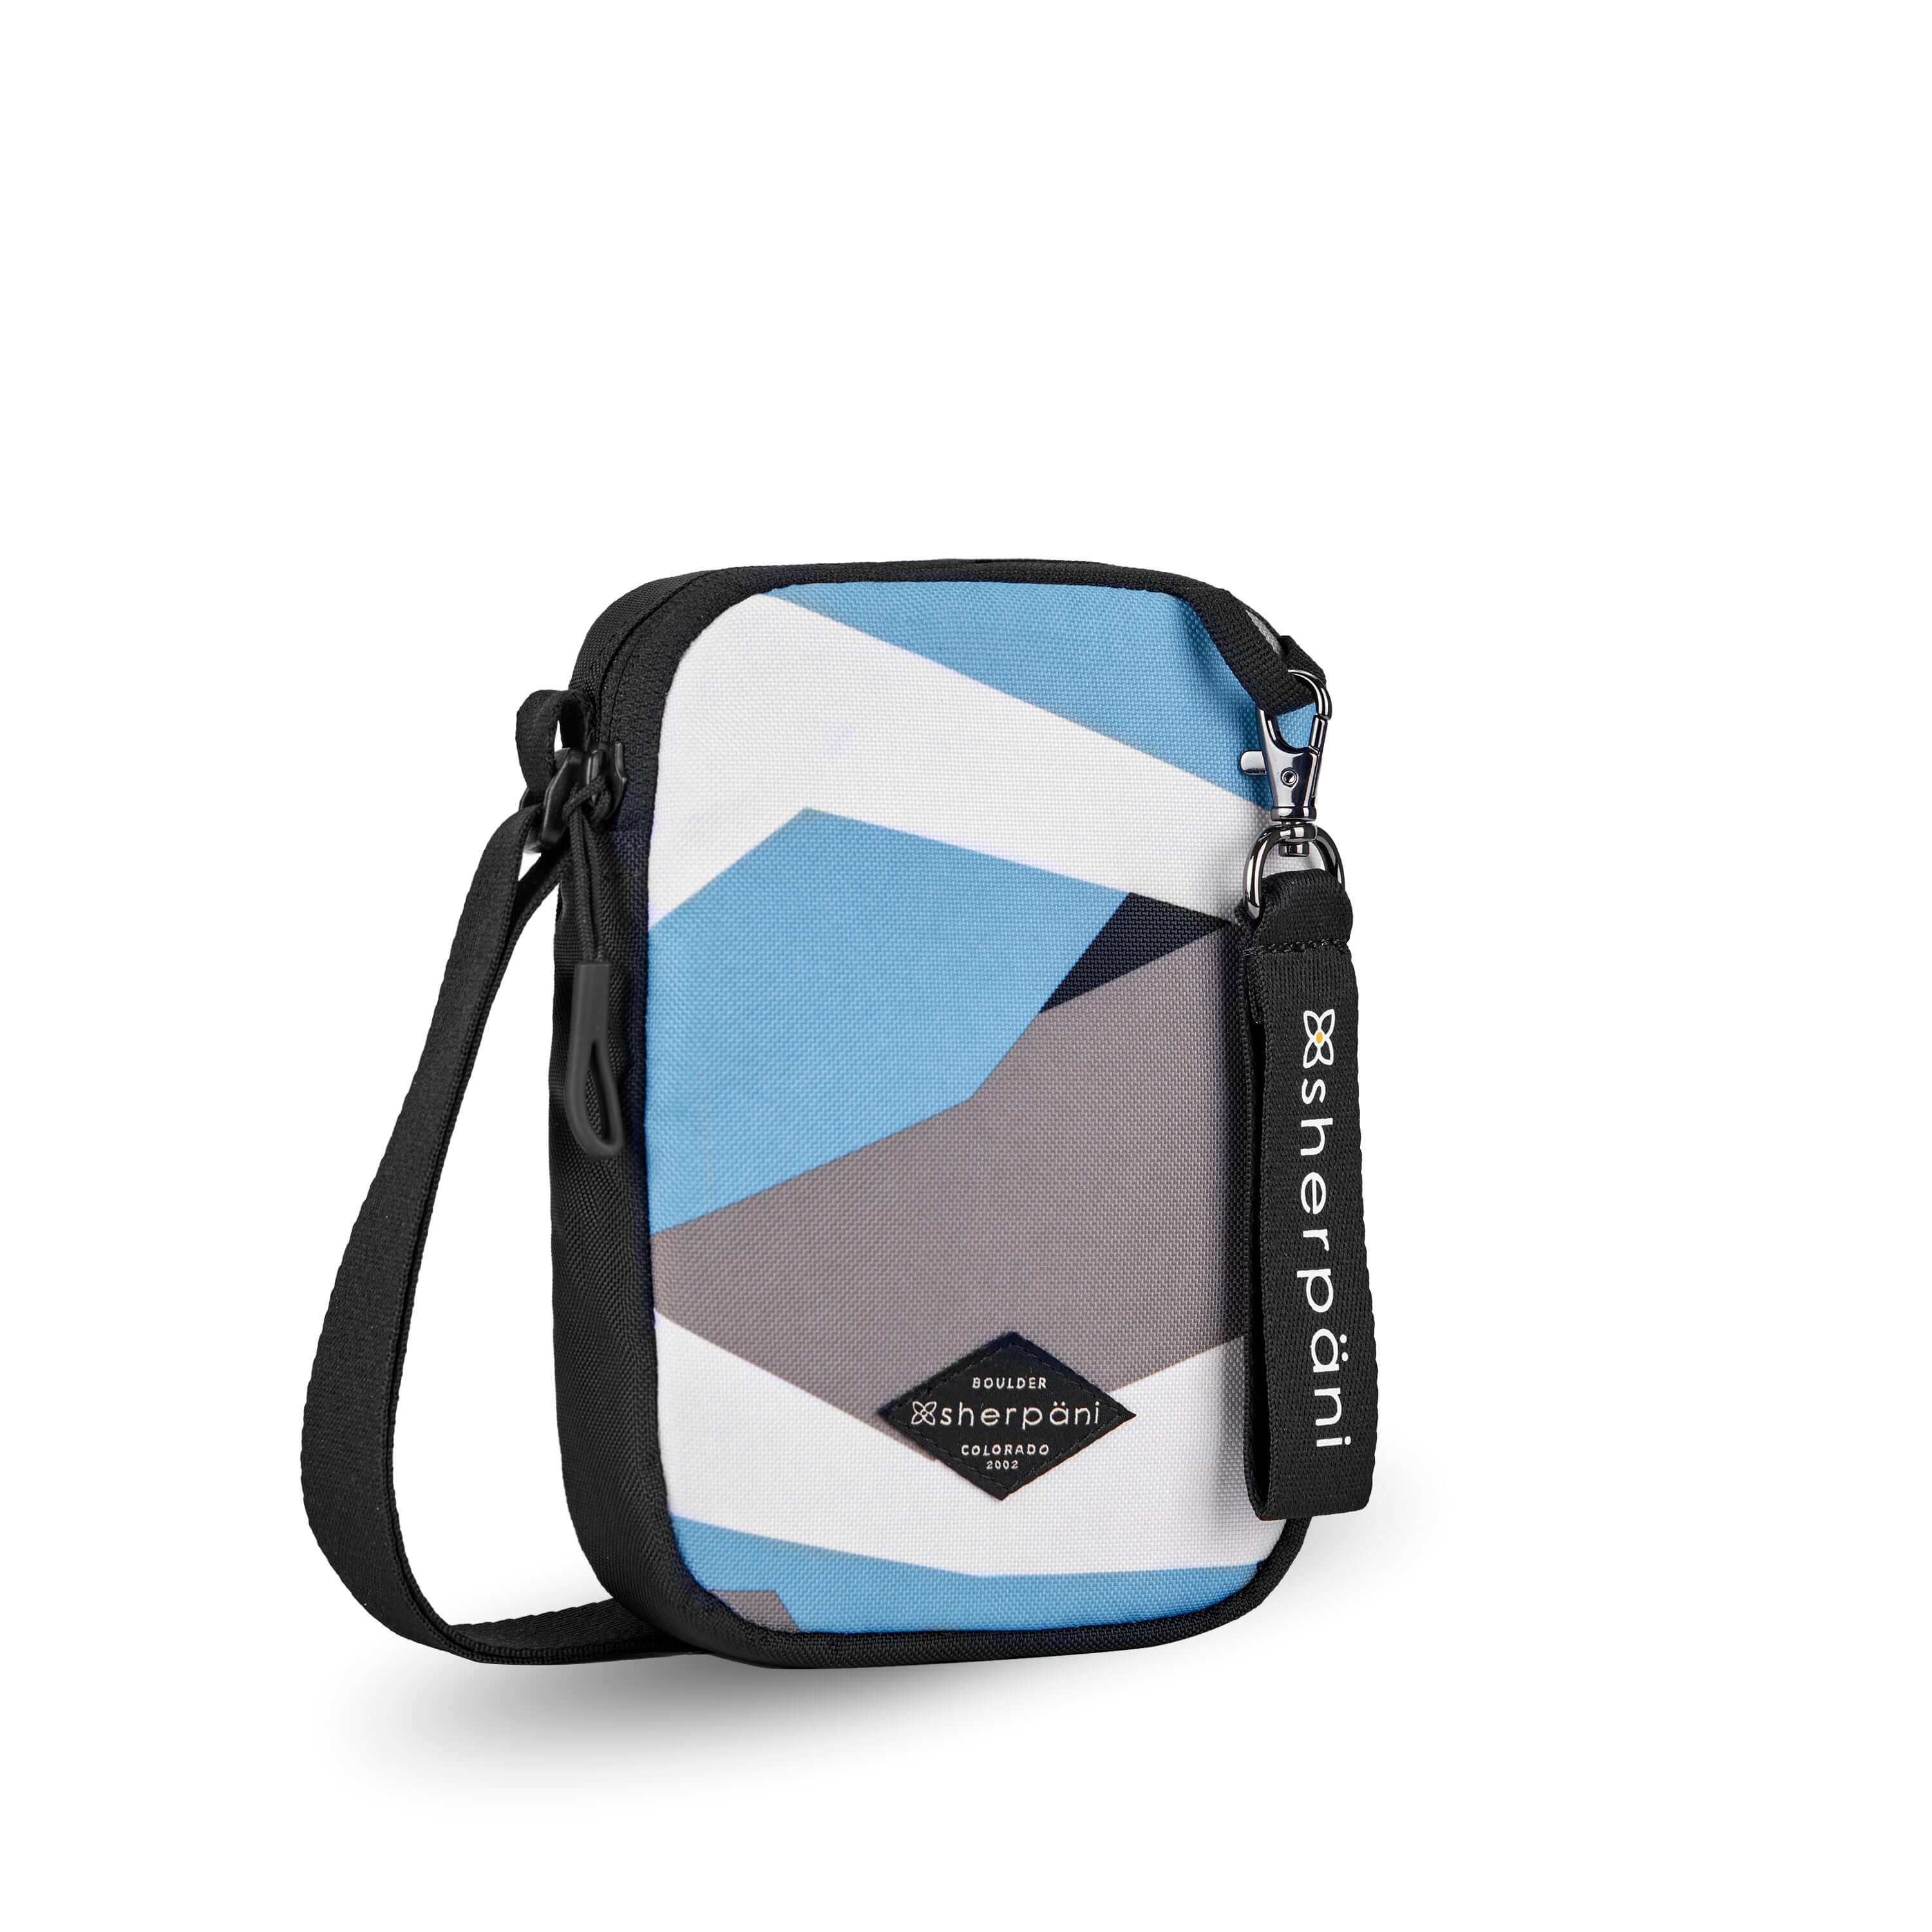 Angled front view of Sherpani crossbody, the Rogue in Summer Camo. The bag is two toned: the front is a camouflage pattern of light blue, gray and white, the back is black. The main zipper compartment features an easy pull zipper accented in black. The bag has an adjustable crossbody strap. A branded Sherpani keychain is clipped to a fabric loop on the top right corner. #color_summer camo